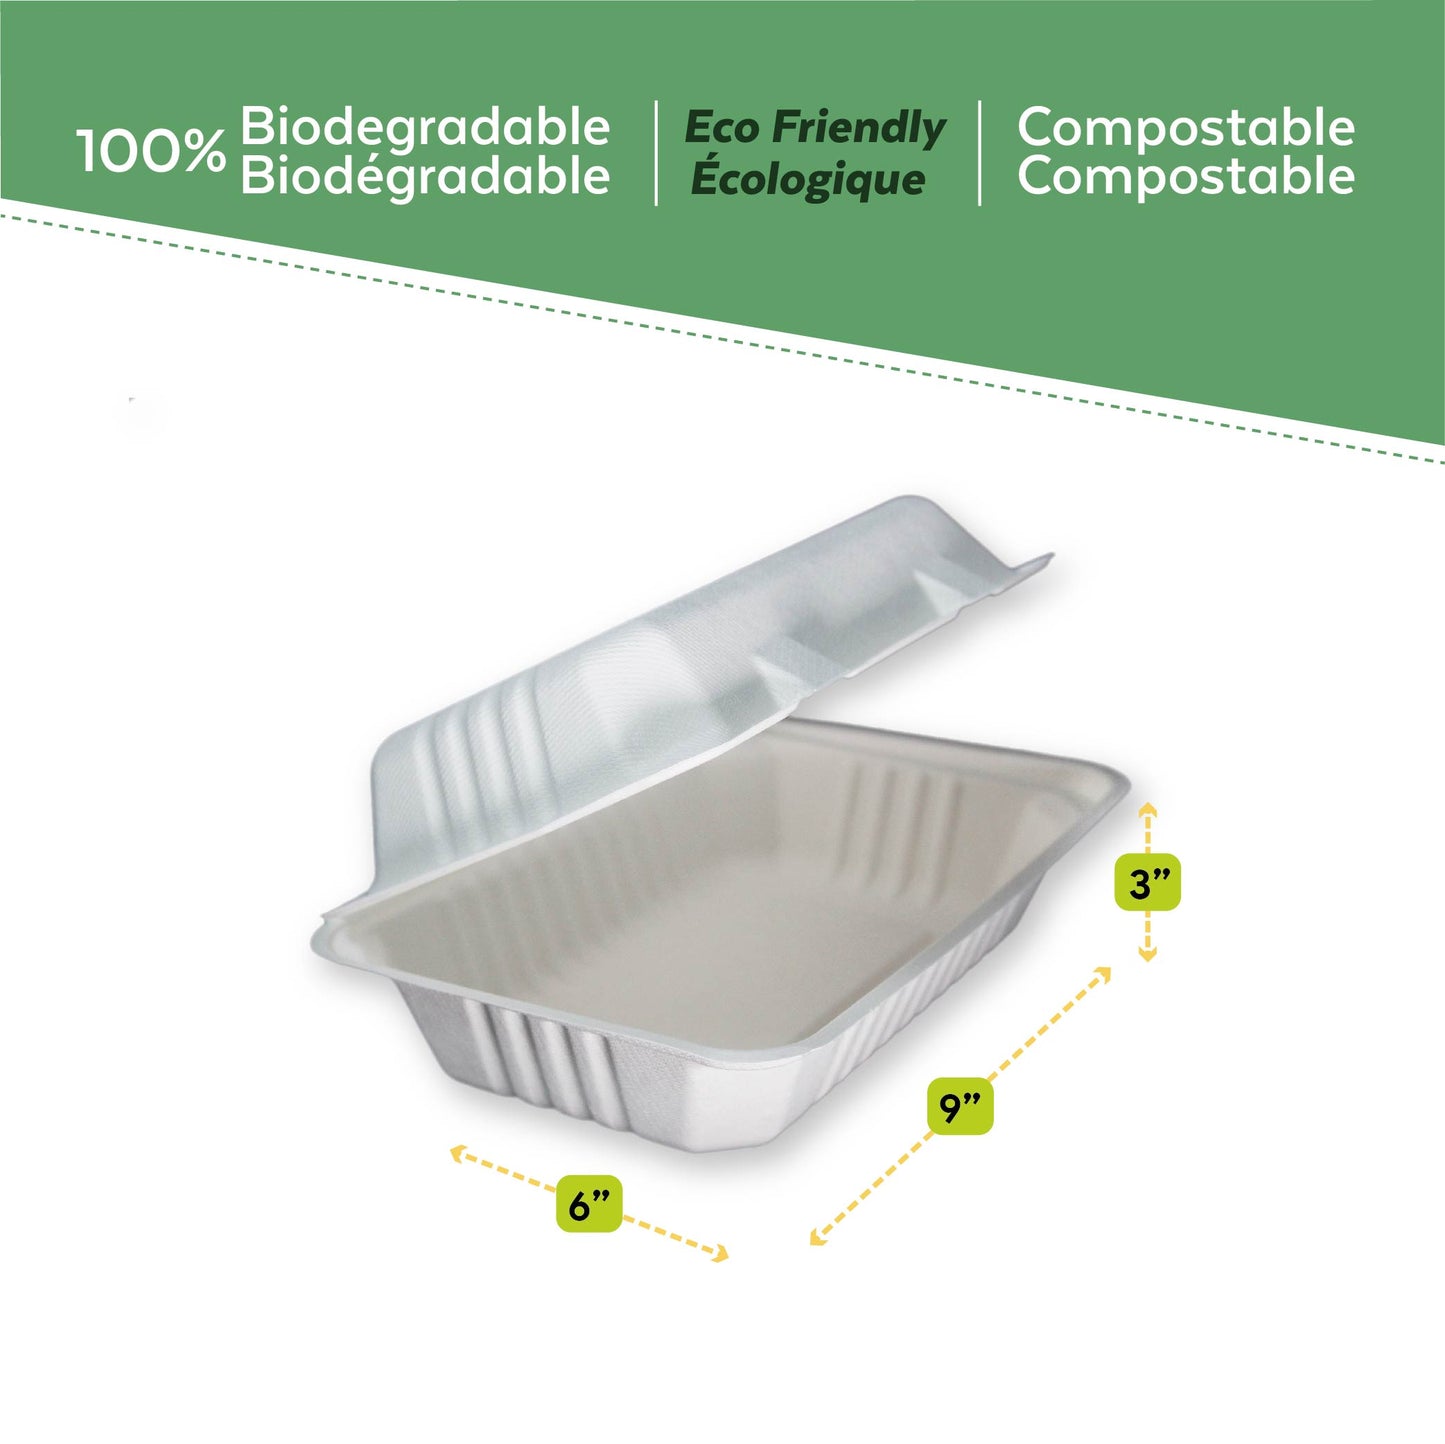 Bagasse Clamshell Container 9"x6"x3" with measurements from EcoPaack